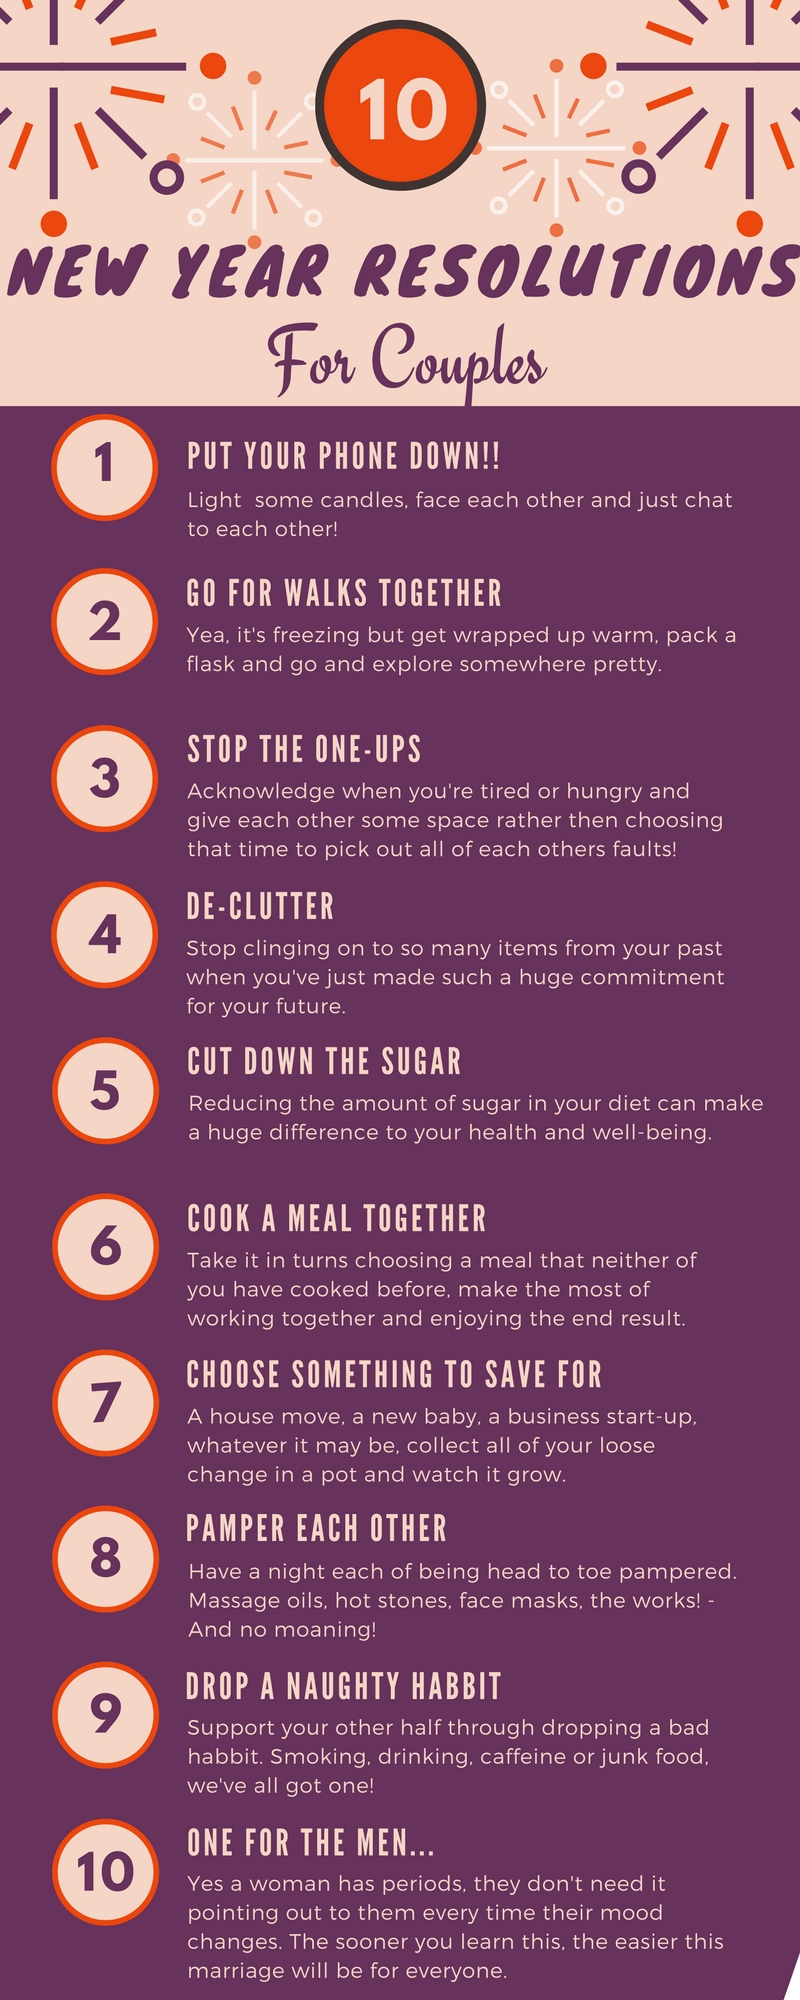 10 Trendy New Years Ideas For Couples new year resolutions ideas for couples read the full list and keep 2023